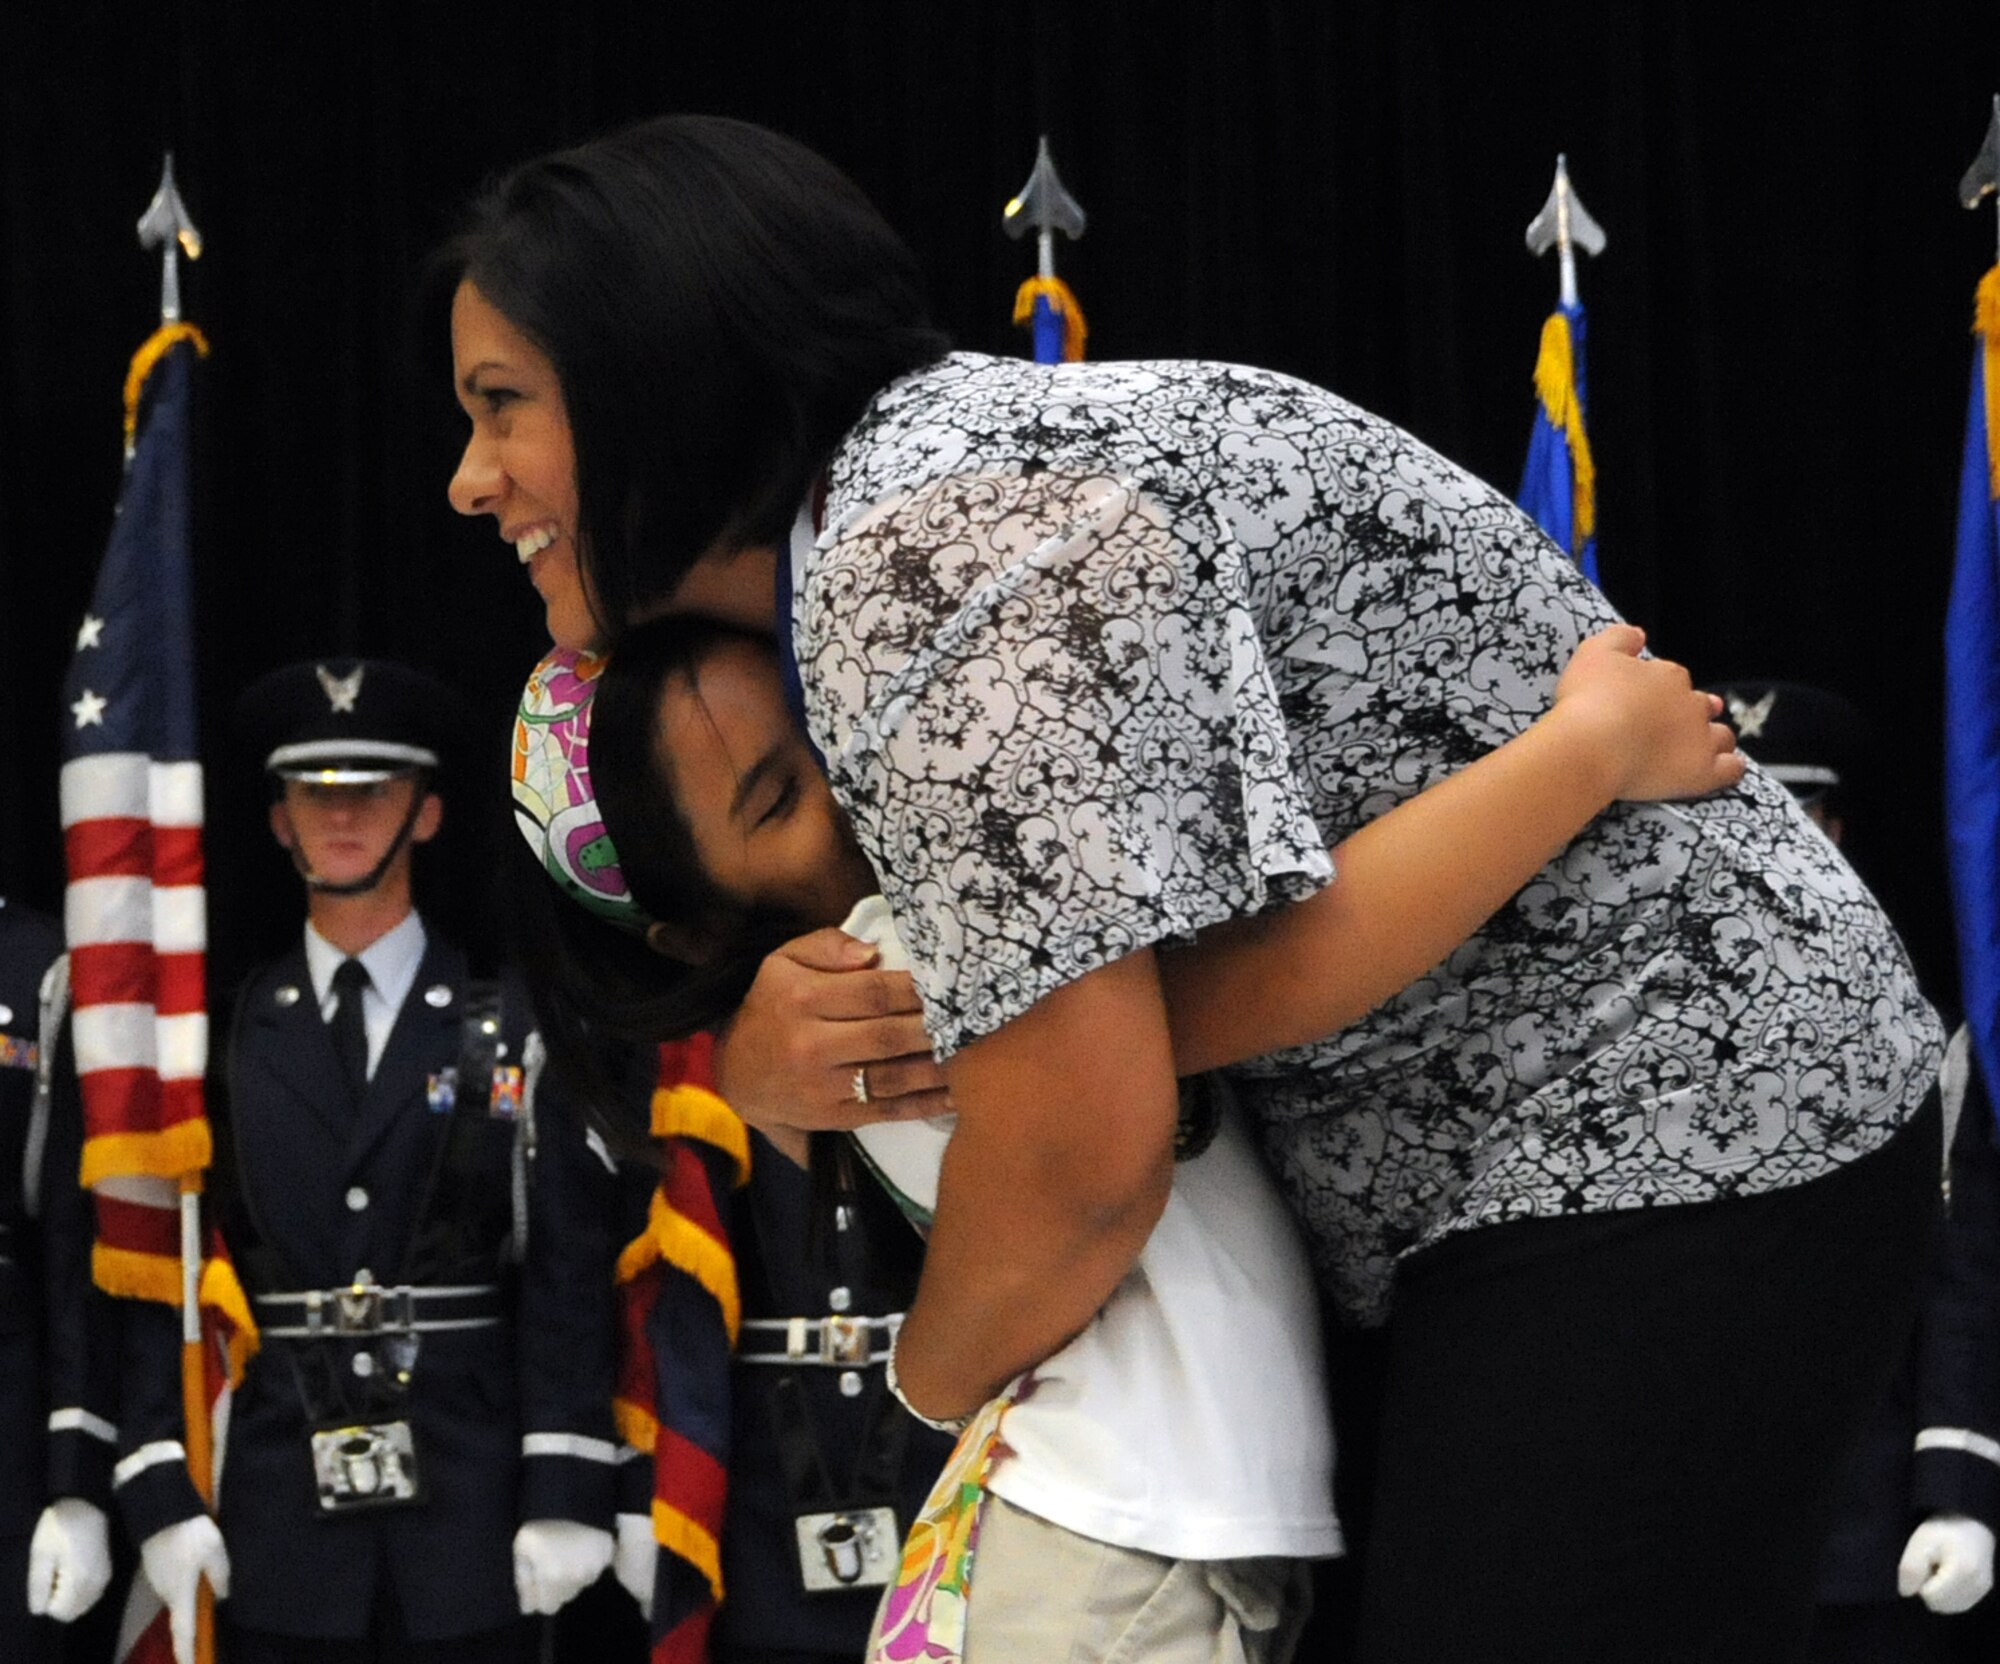 ANDERSEN AIR FORCE BASE, Guam - Jaeleen Jaylo gives a hug to Mrs. Gina Andersen, Department of Defense Education Activity Nurse, for her heroic efforts during the Andersen Elementary School Awards Ceremony here March 4. Mrs. Andersen was presented with for aiding CPR until first responders arrived on the scene.  (U.S. Air Force photo by Airman 1st Class Courtney Witt)
